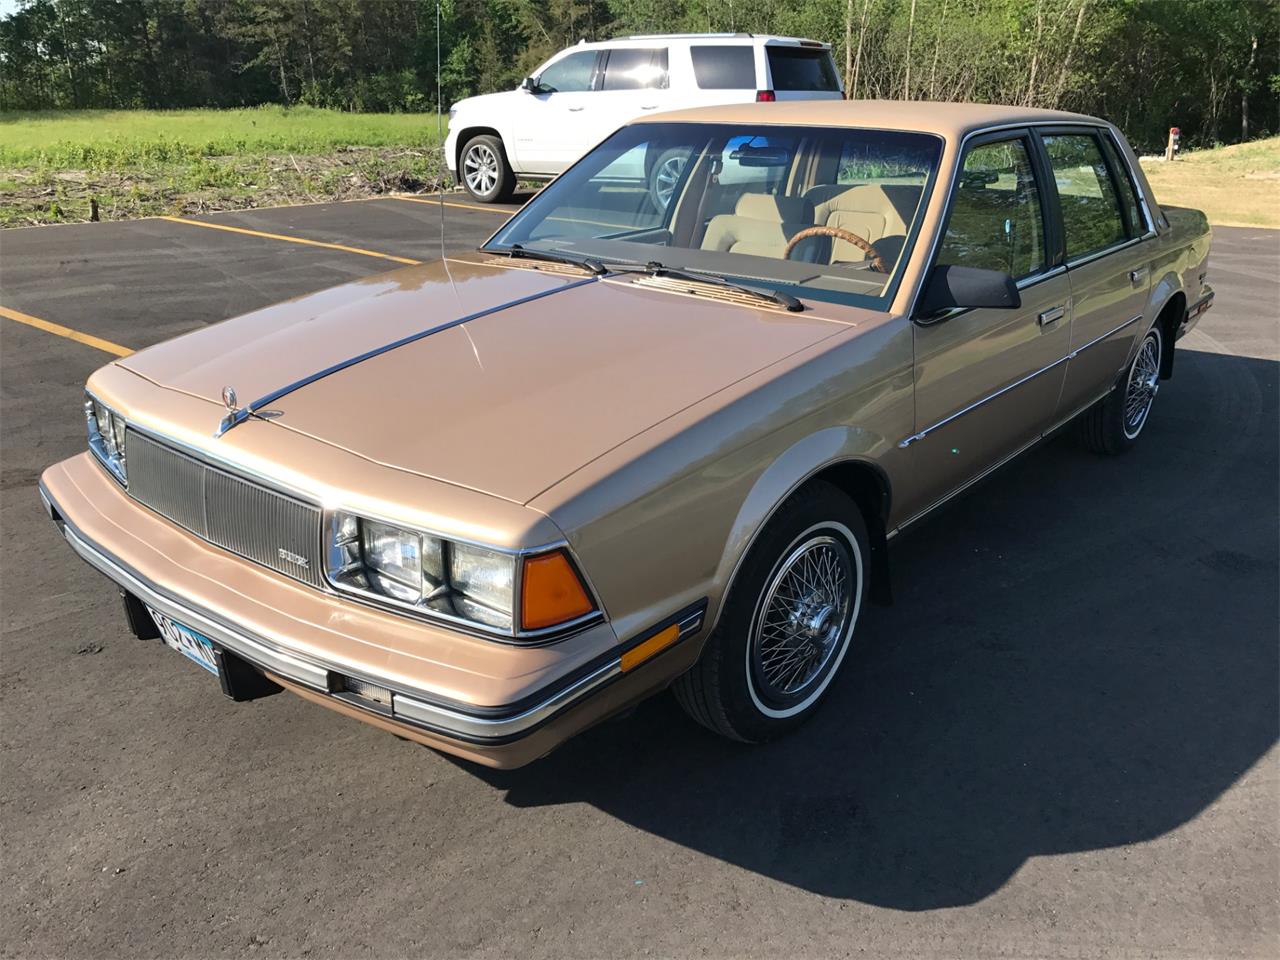 1985 buick century for sale classiccars com cc 991581 1985 buick century for sale